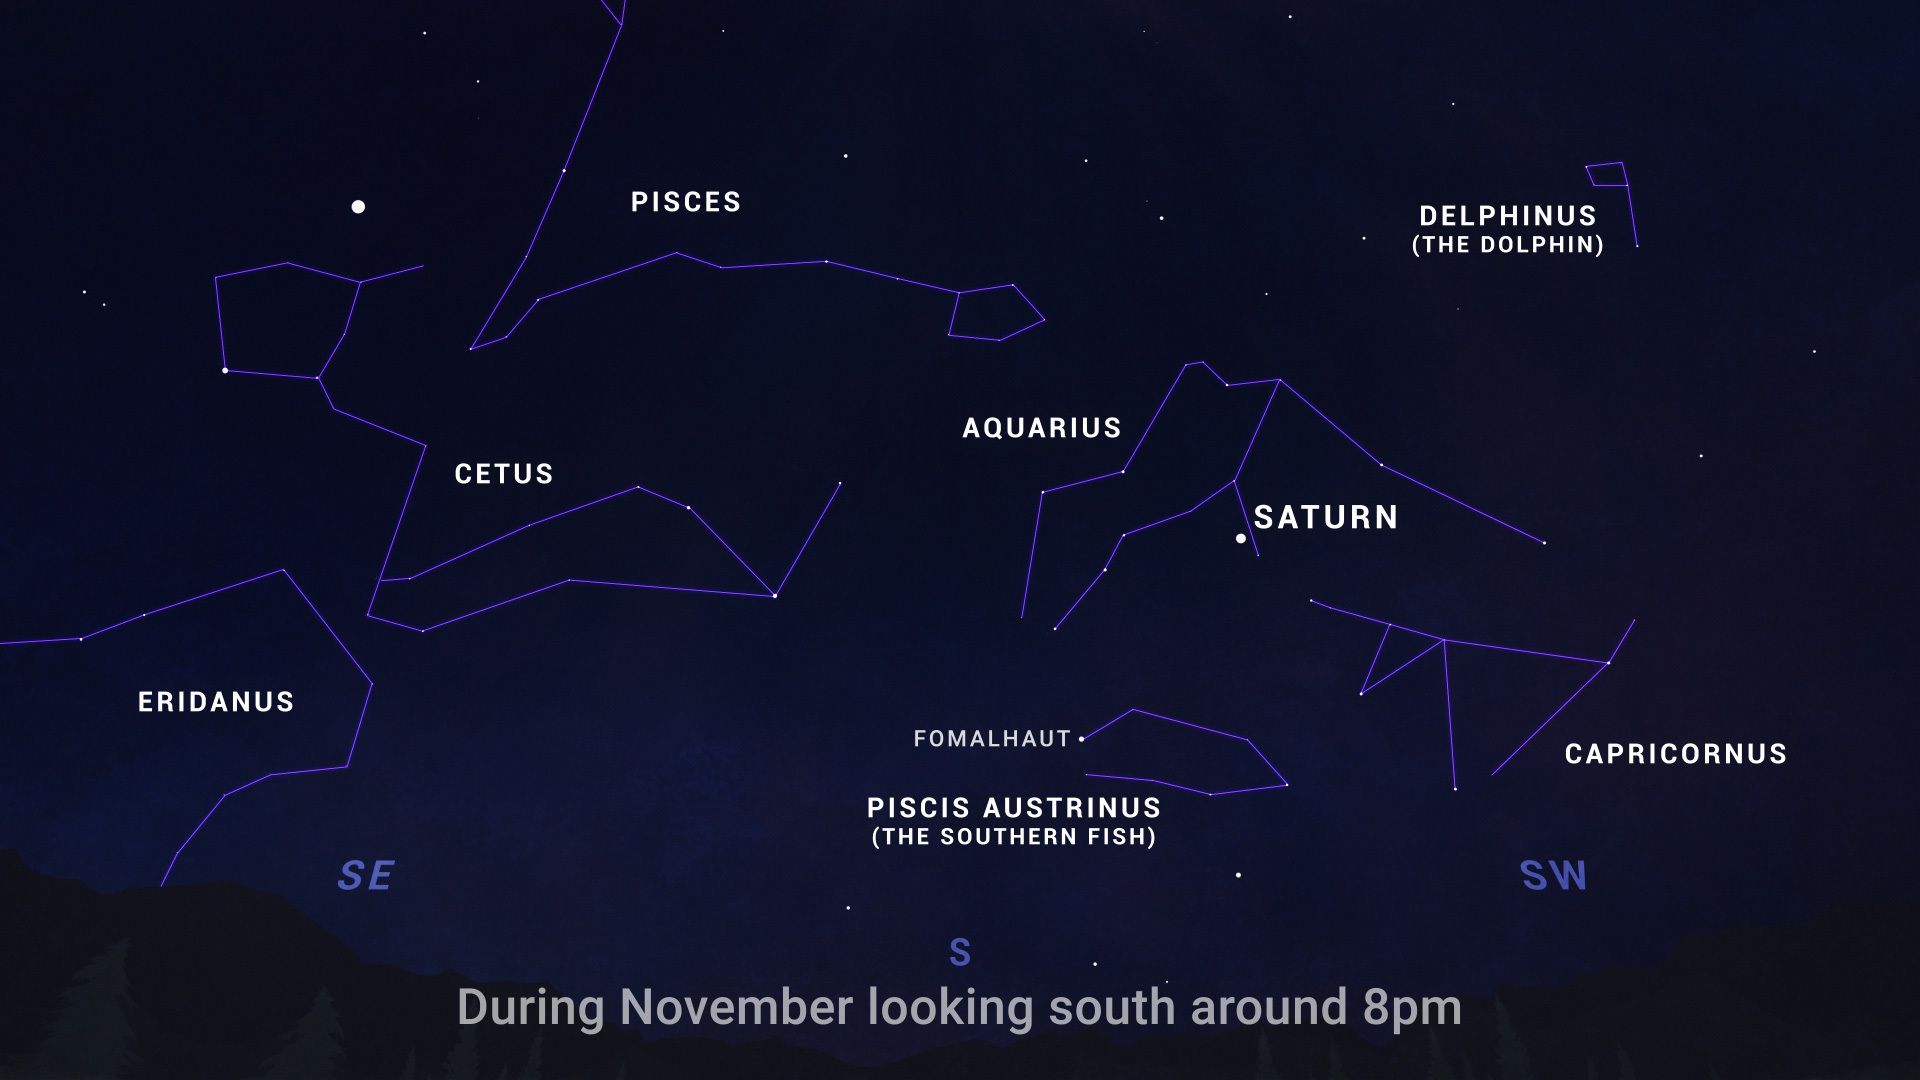 An illustrated sky chart shows the night sky facing southward, around 8pm in November 2023. Six constellations are depicted by lines that trace out their patterns of stars; from left to right: Cetus, Pisces, Aquarius, The Southern Fish, The Dolphin, and Capricornus. The planet Saturn is a bright white dot within Aquarius, at right of center.